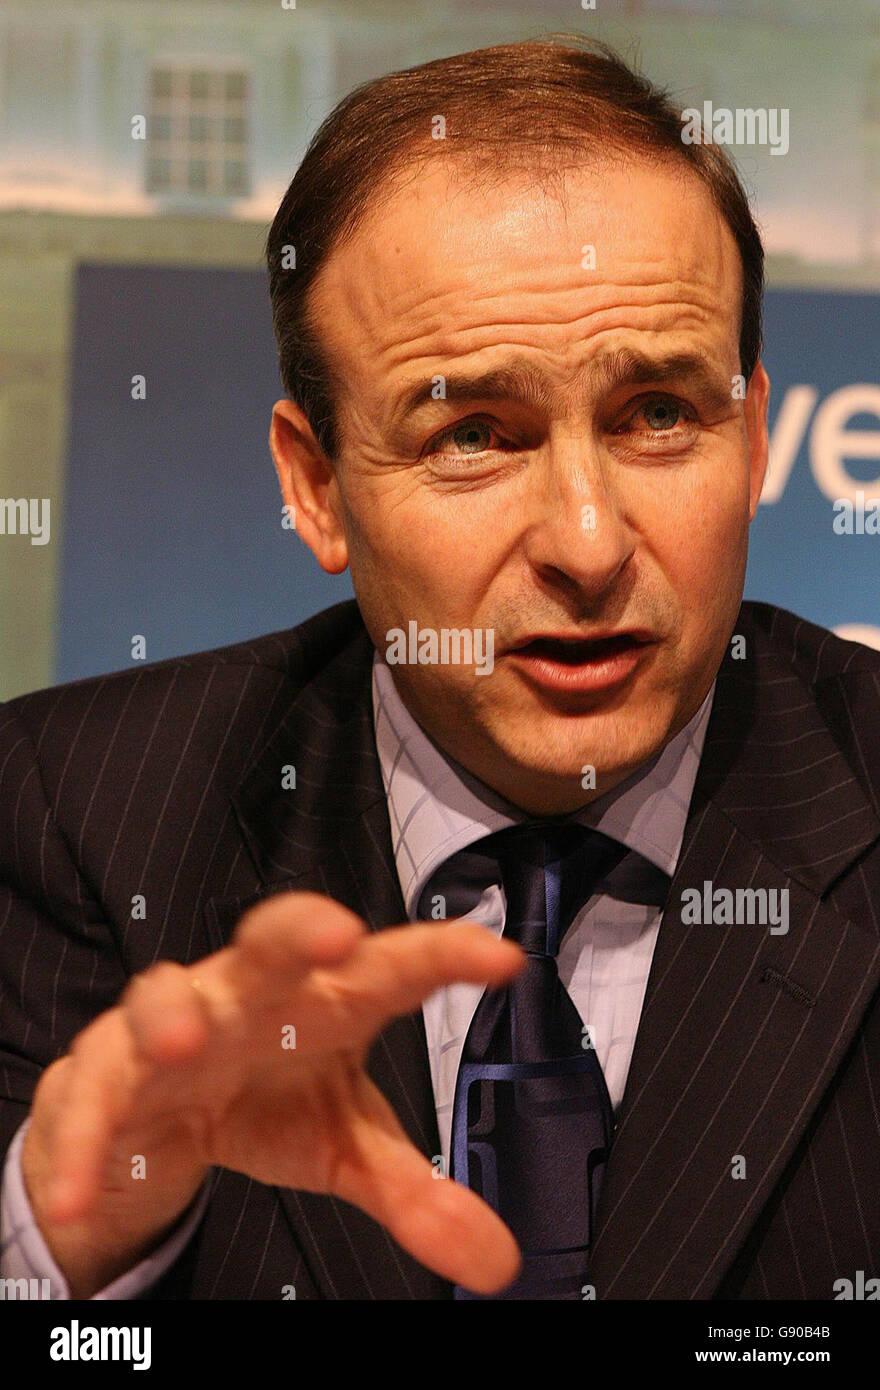 Irish Enterprise Minister Micheal Martin announces that the controversial Groceries Order is to be entirely abolished, Tuesday November 8, 2005. Mr Martin said the 1987 Order, which bans retailers from passing on supplier discounts to customers, is being repealed in its entirety. See PA story CONSUMER Groceries. PRESS ASSOCIATION Photo. Photo credit should read: Niall Carson/PA Stock Photo